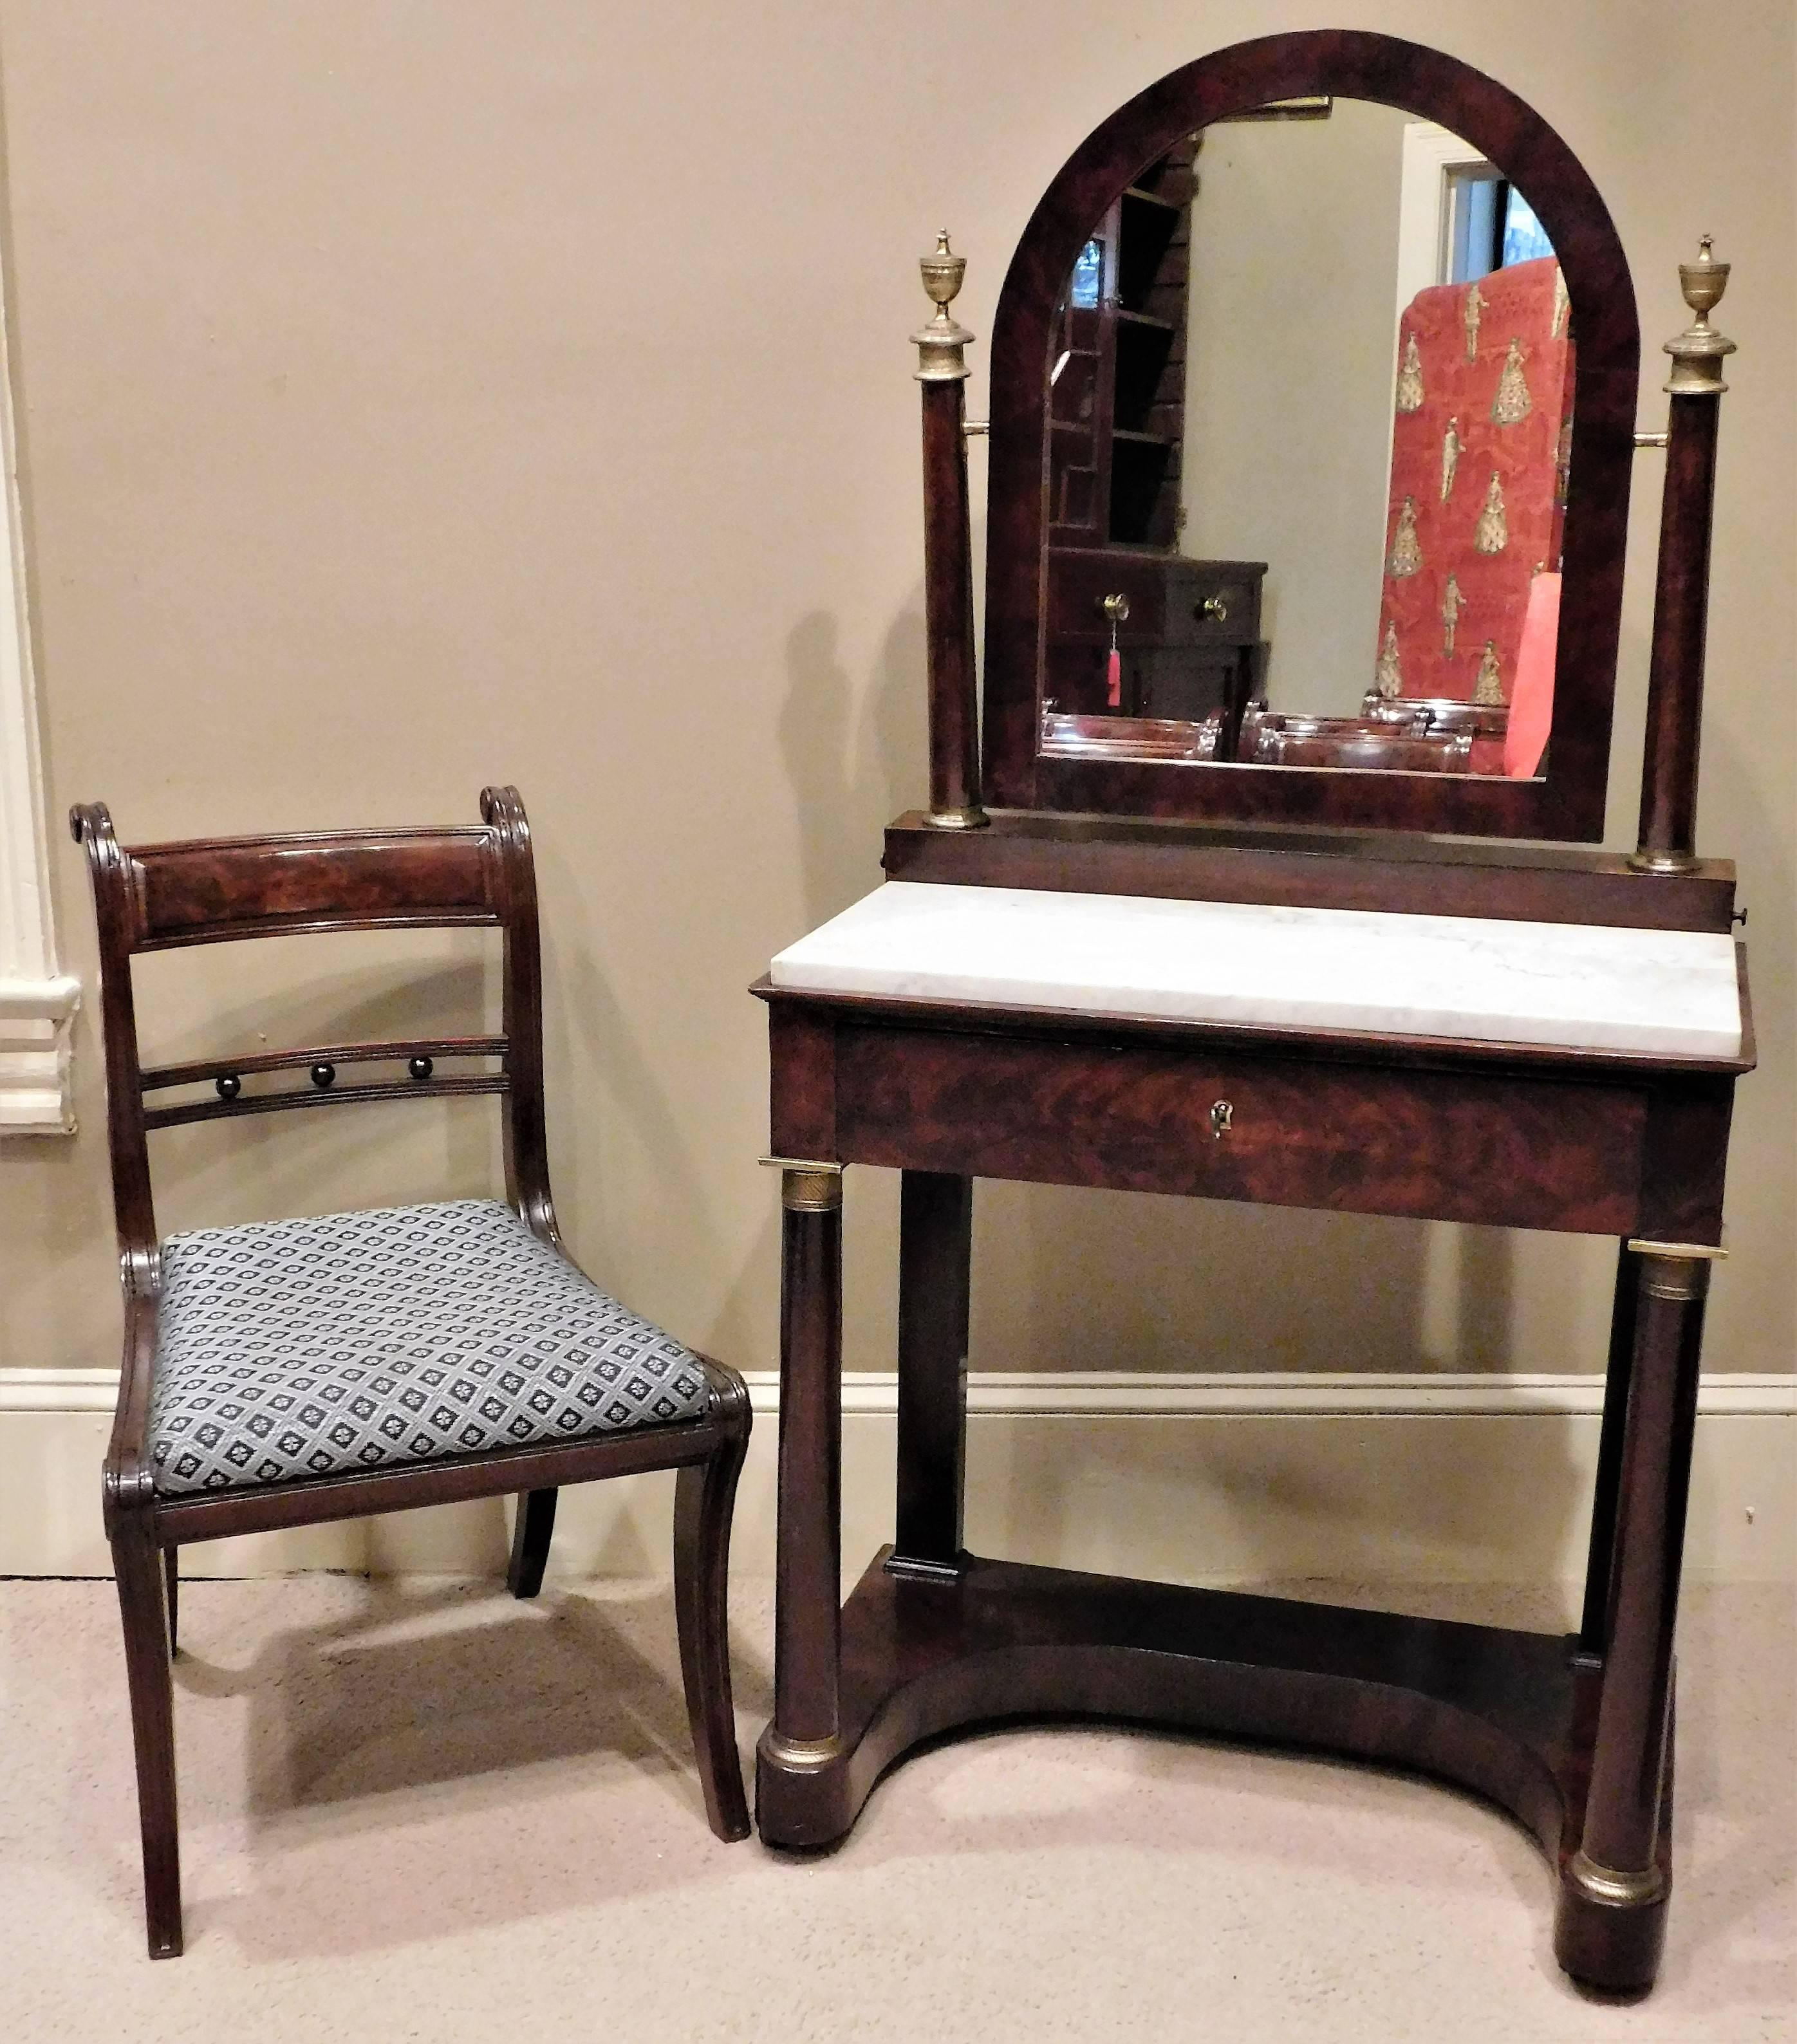 This Empire dressing table has a marble top and ormolu (gilt brass) mounts and knobs. The piece is French polished mahogany and figured mahogany veneer with oak secondary wood. The table has one large drawer with dividers and two long candle drawers